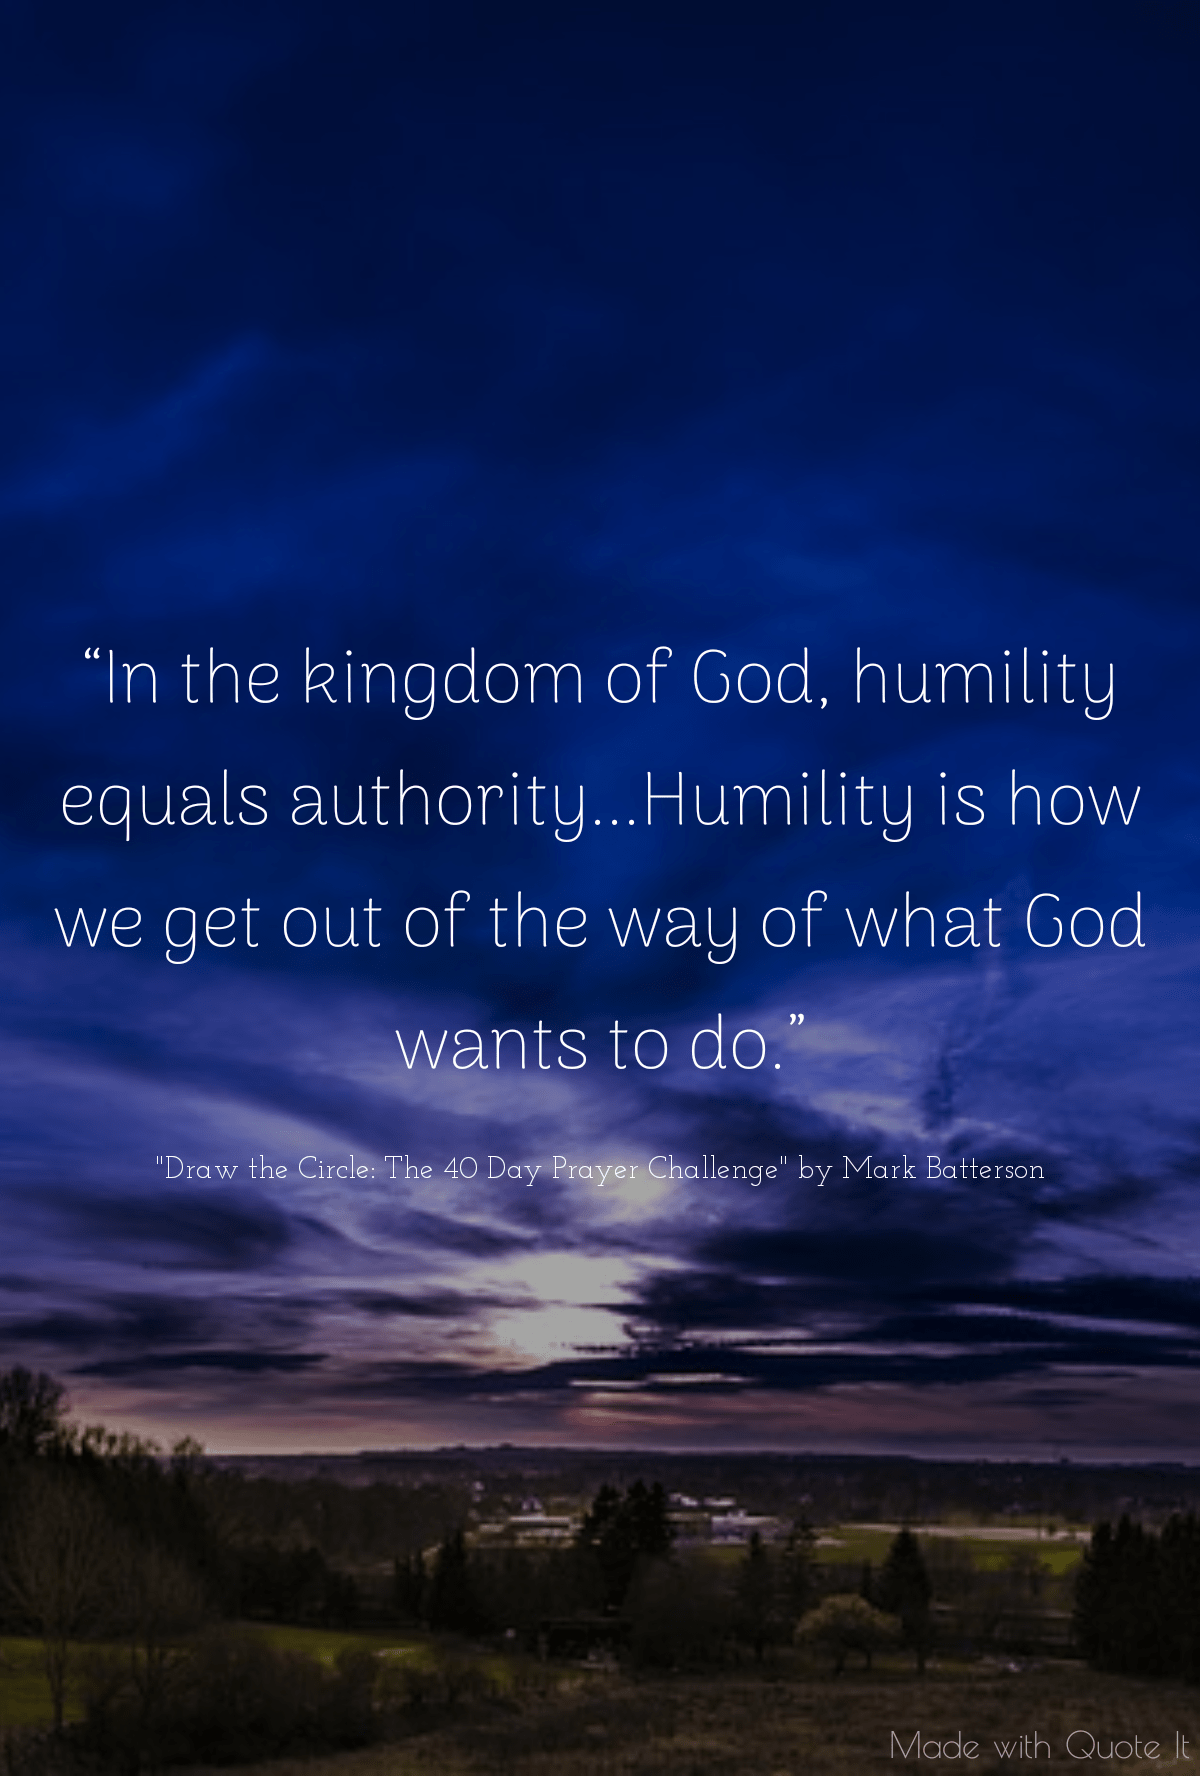 In the kingdom of God, humility equals authority...Humility is how we get out of the way of what God wants to do. - 